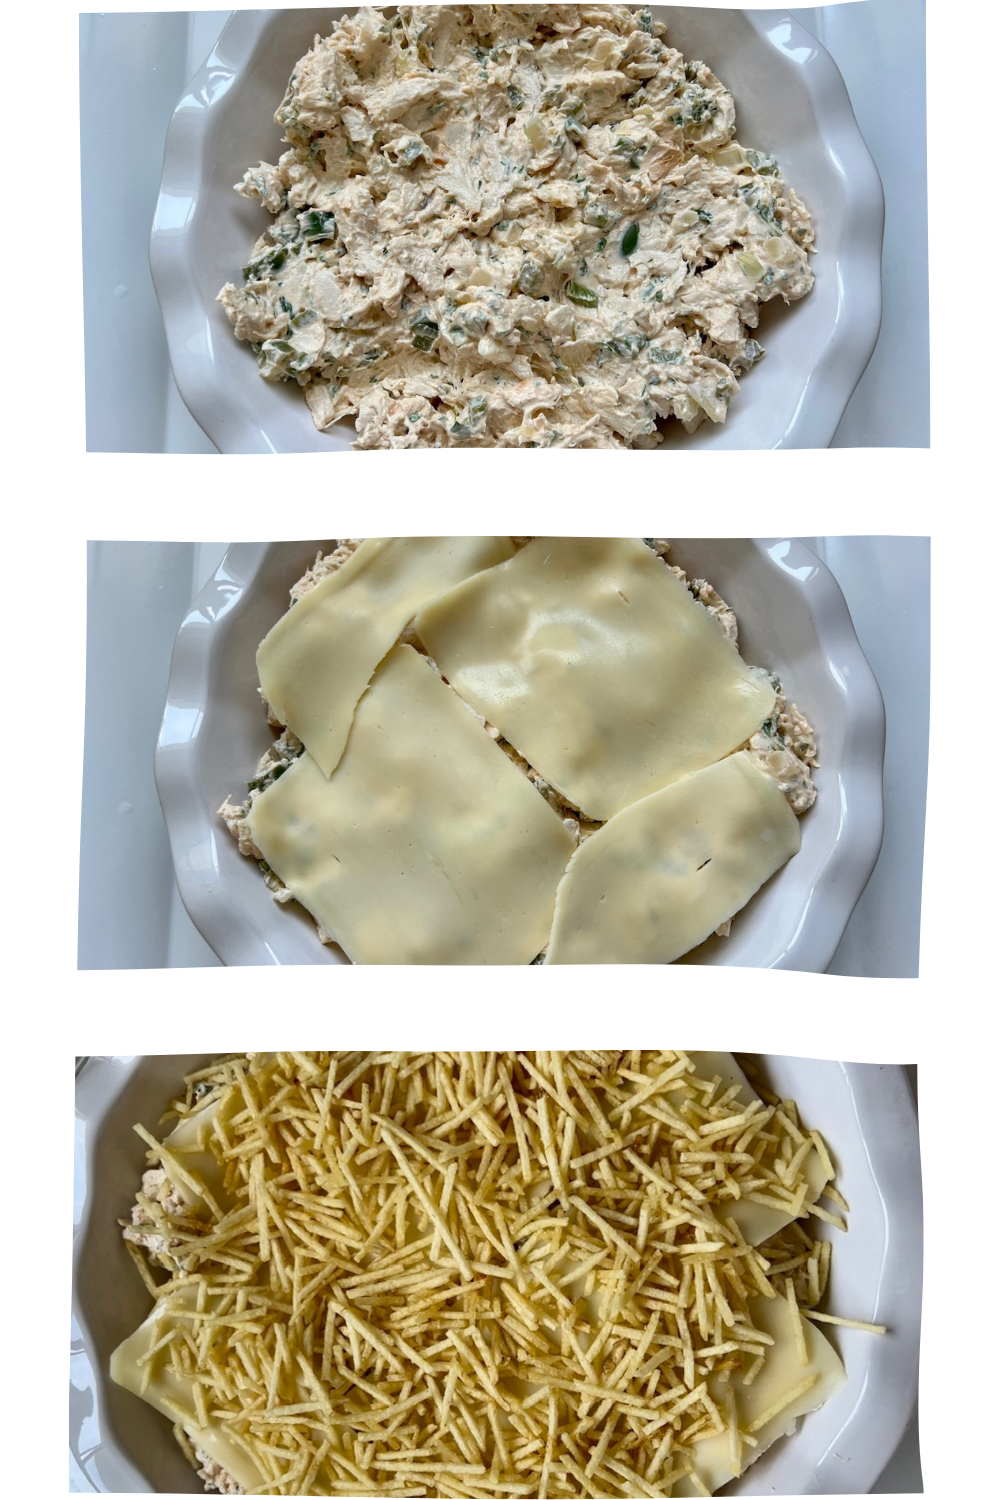 3-pictures stacked to show the chicken mixture added to pie pan, then slices of cheese placed on top, then potato sticks spread over the cheese for the Ultimate chicken casserole recipe.